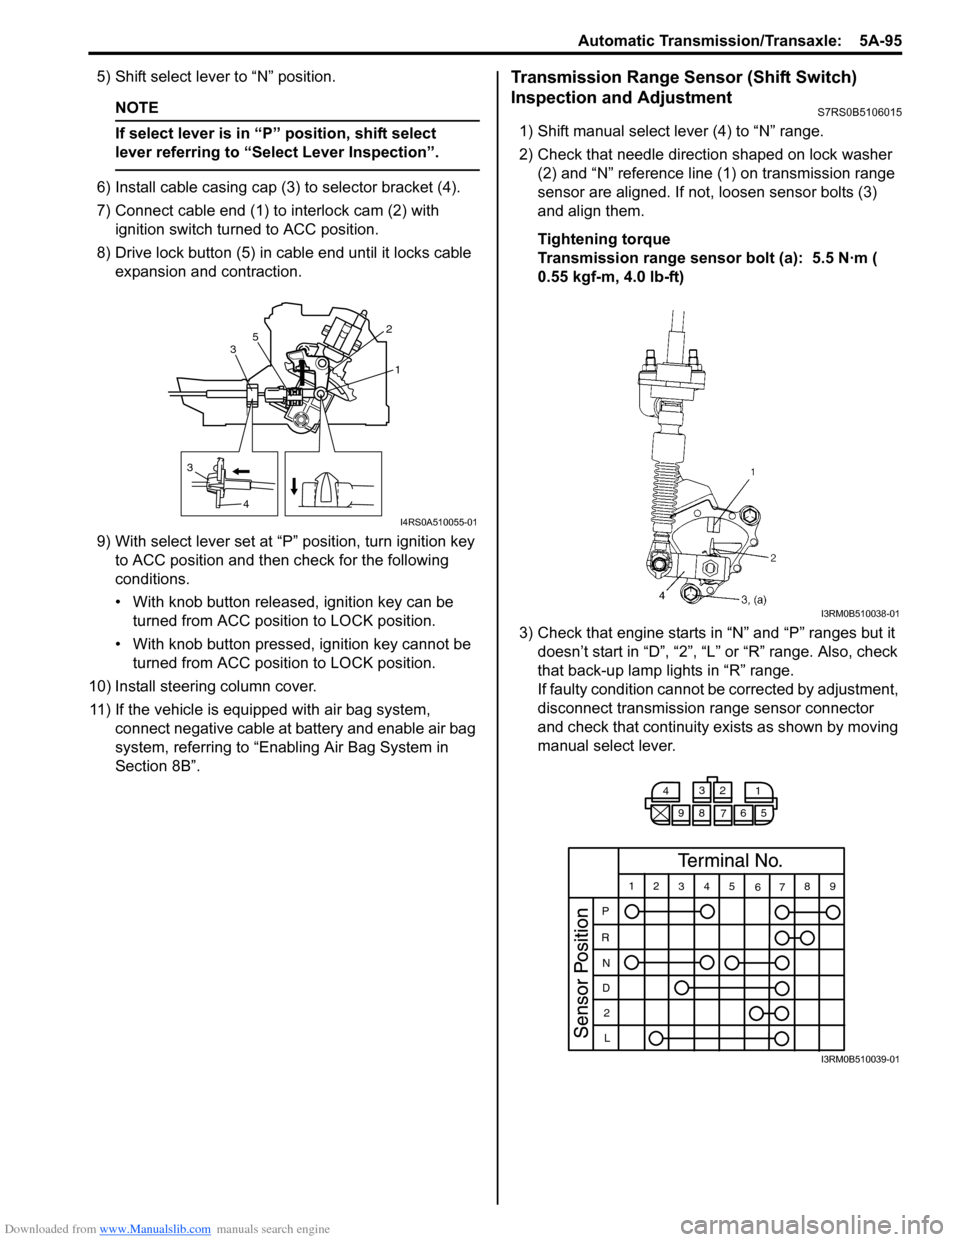 SUZUKI SWIFT 2007 2.G Service Repair Manual Downloaded from www.Manualslib.com manuals search engine Automatic Transmission/Transaxle:  5A-95
5) Shift select lever to “N” position.
NOTE
If select lever is in “P” position, shift select 
